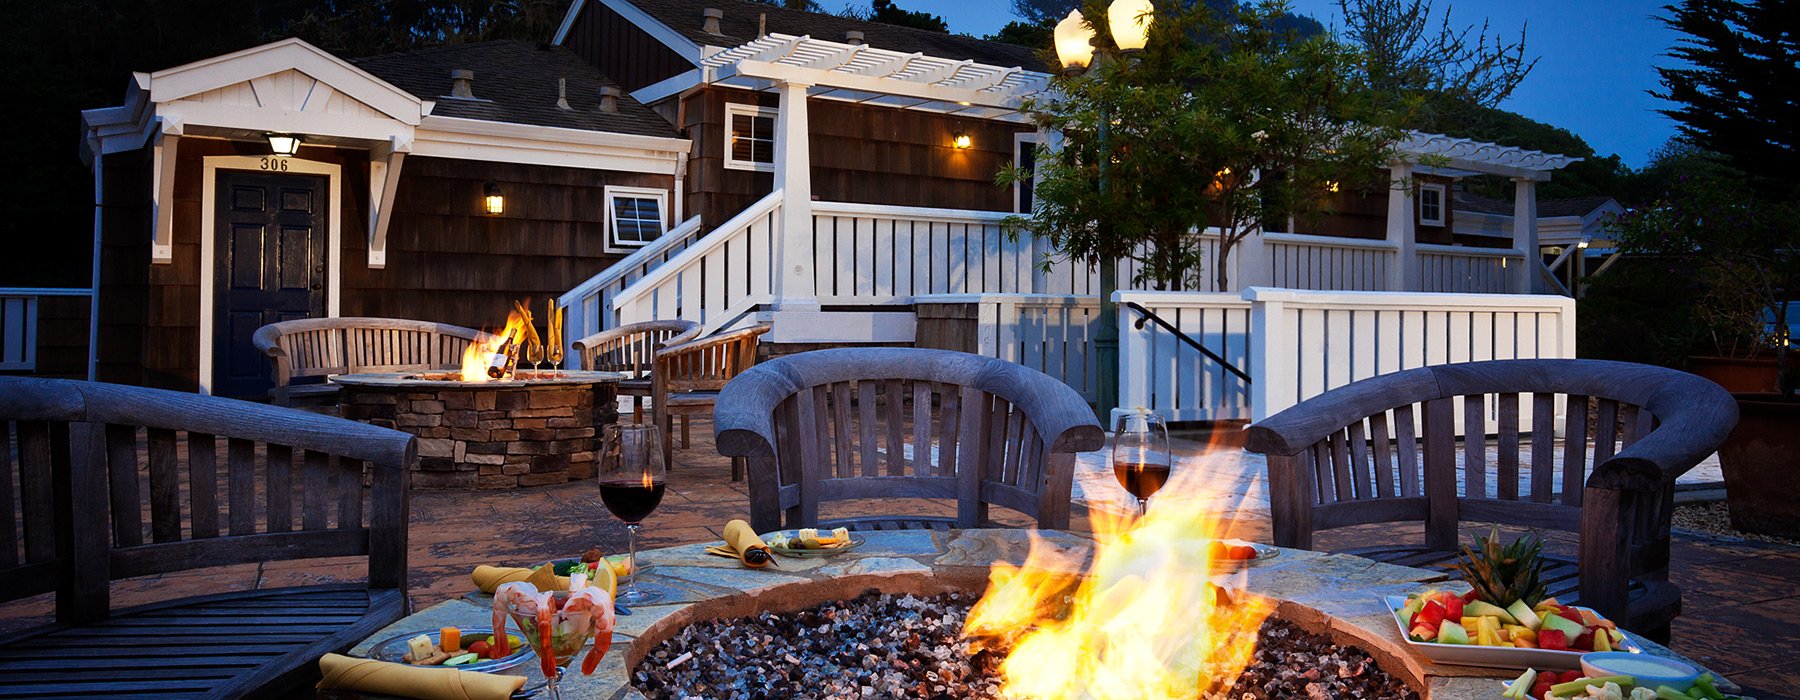 fire pit with food and cottage in background